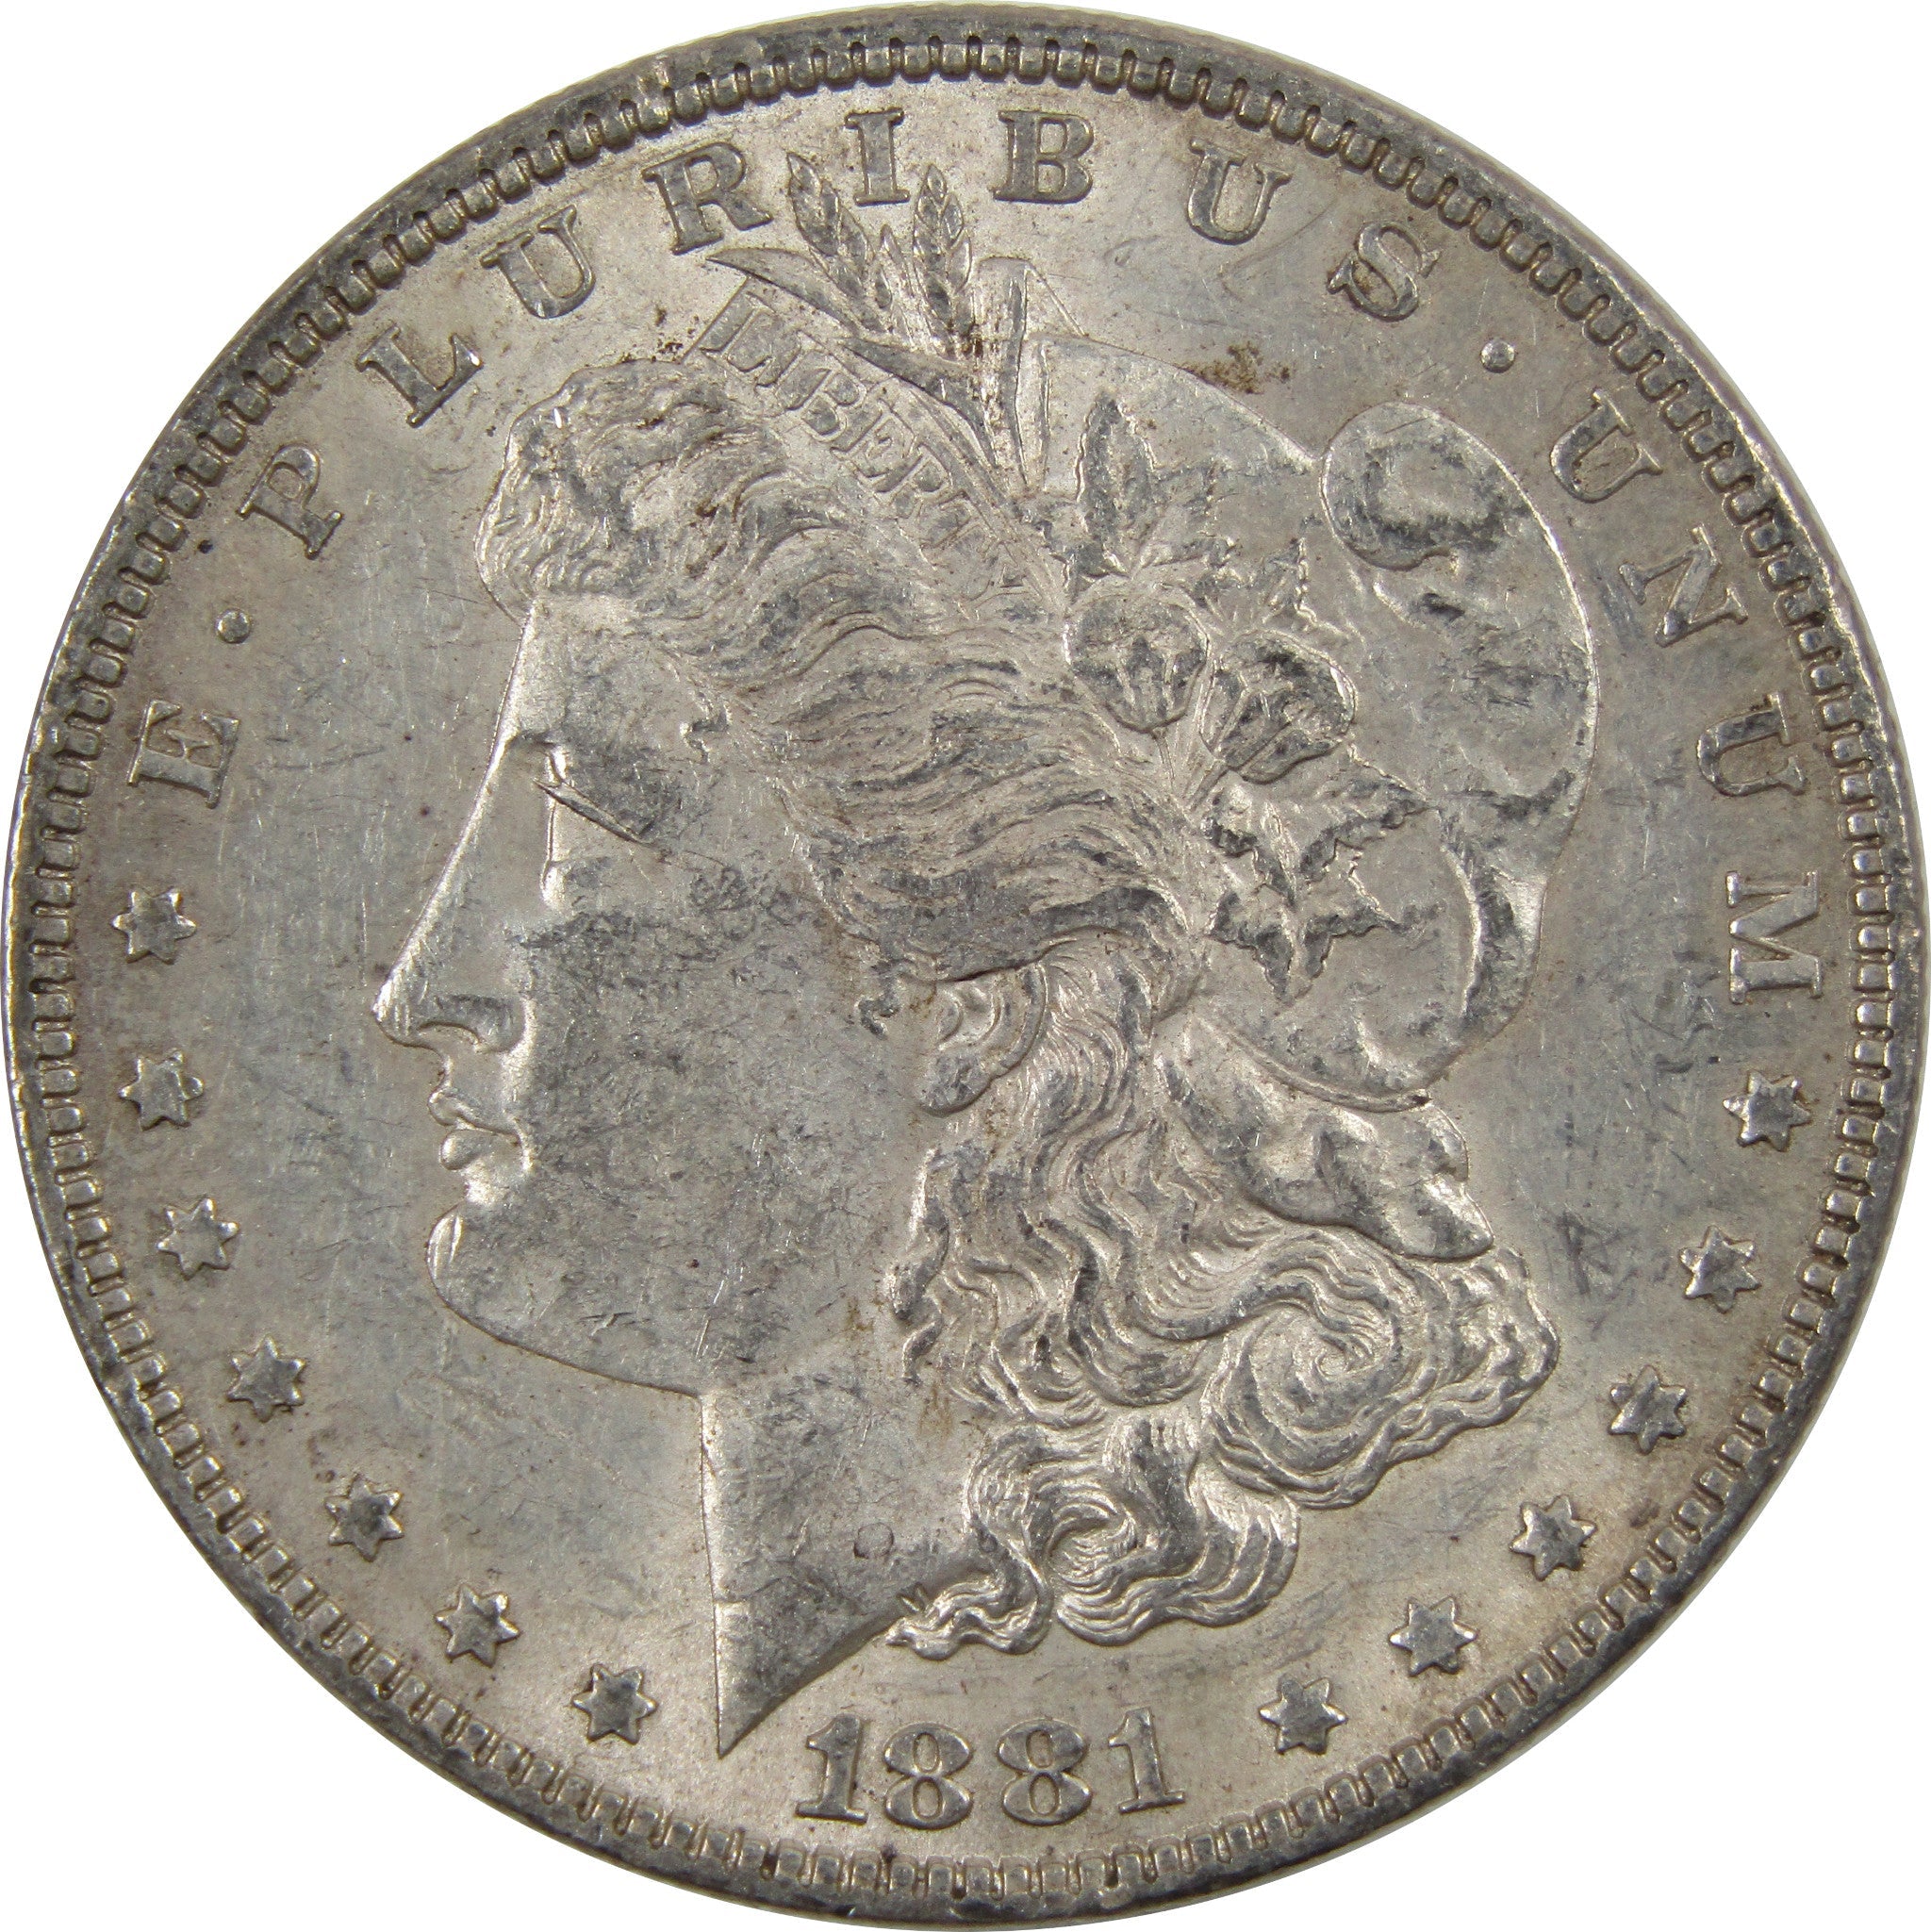 1881 Morgan Dollar AU About Uncirculated 90% Silver $1 Coin SKU:I5458 - Morgan coin - Morgan silver dollar - Morgan silver dollar for sale - Profile Coins &amp; Collectibles